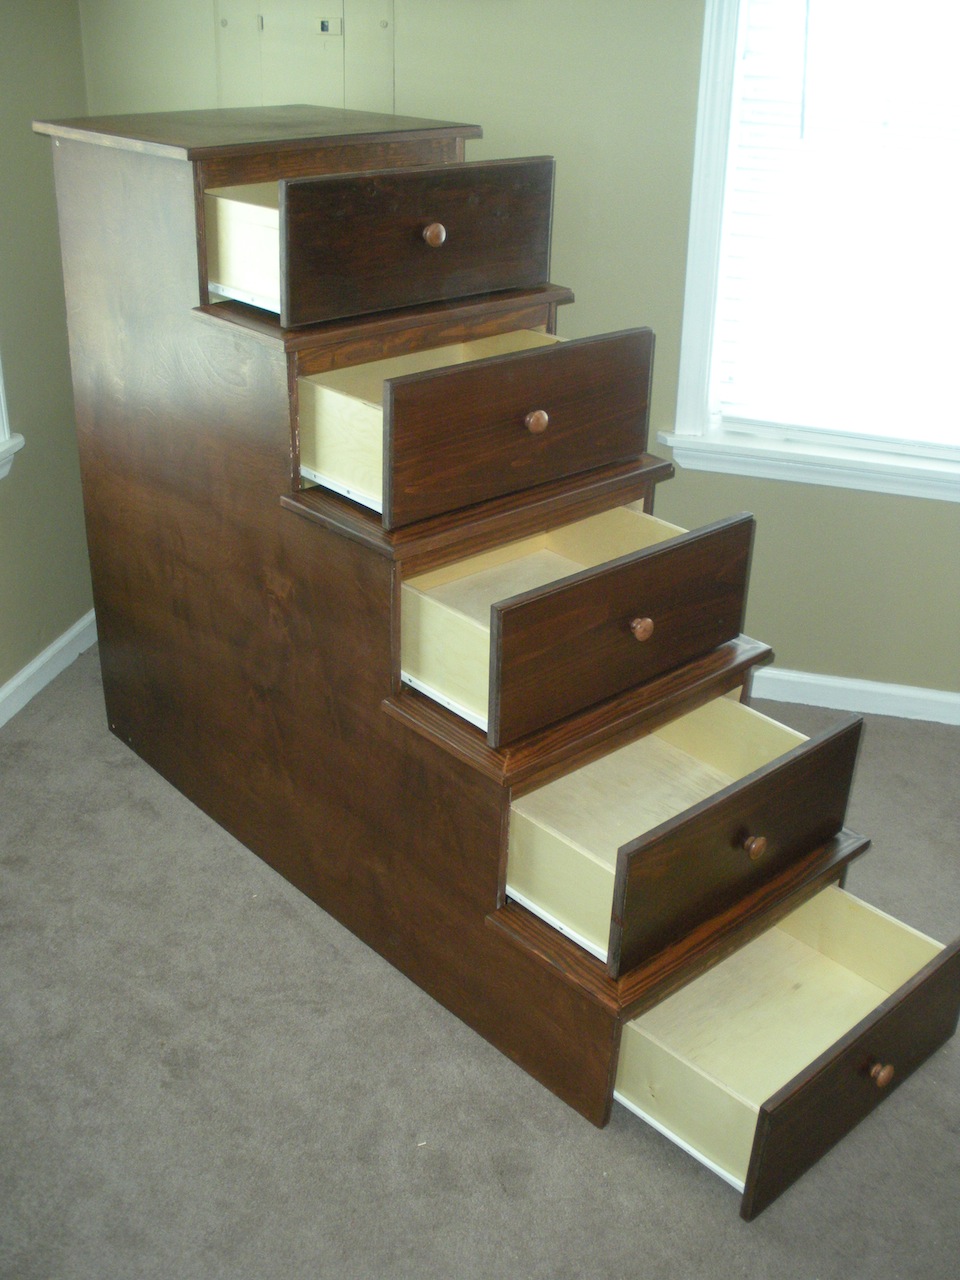 Richard S Bunk Bed Storage The Wood, Bunk Bed With Storage Steps